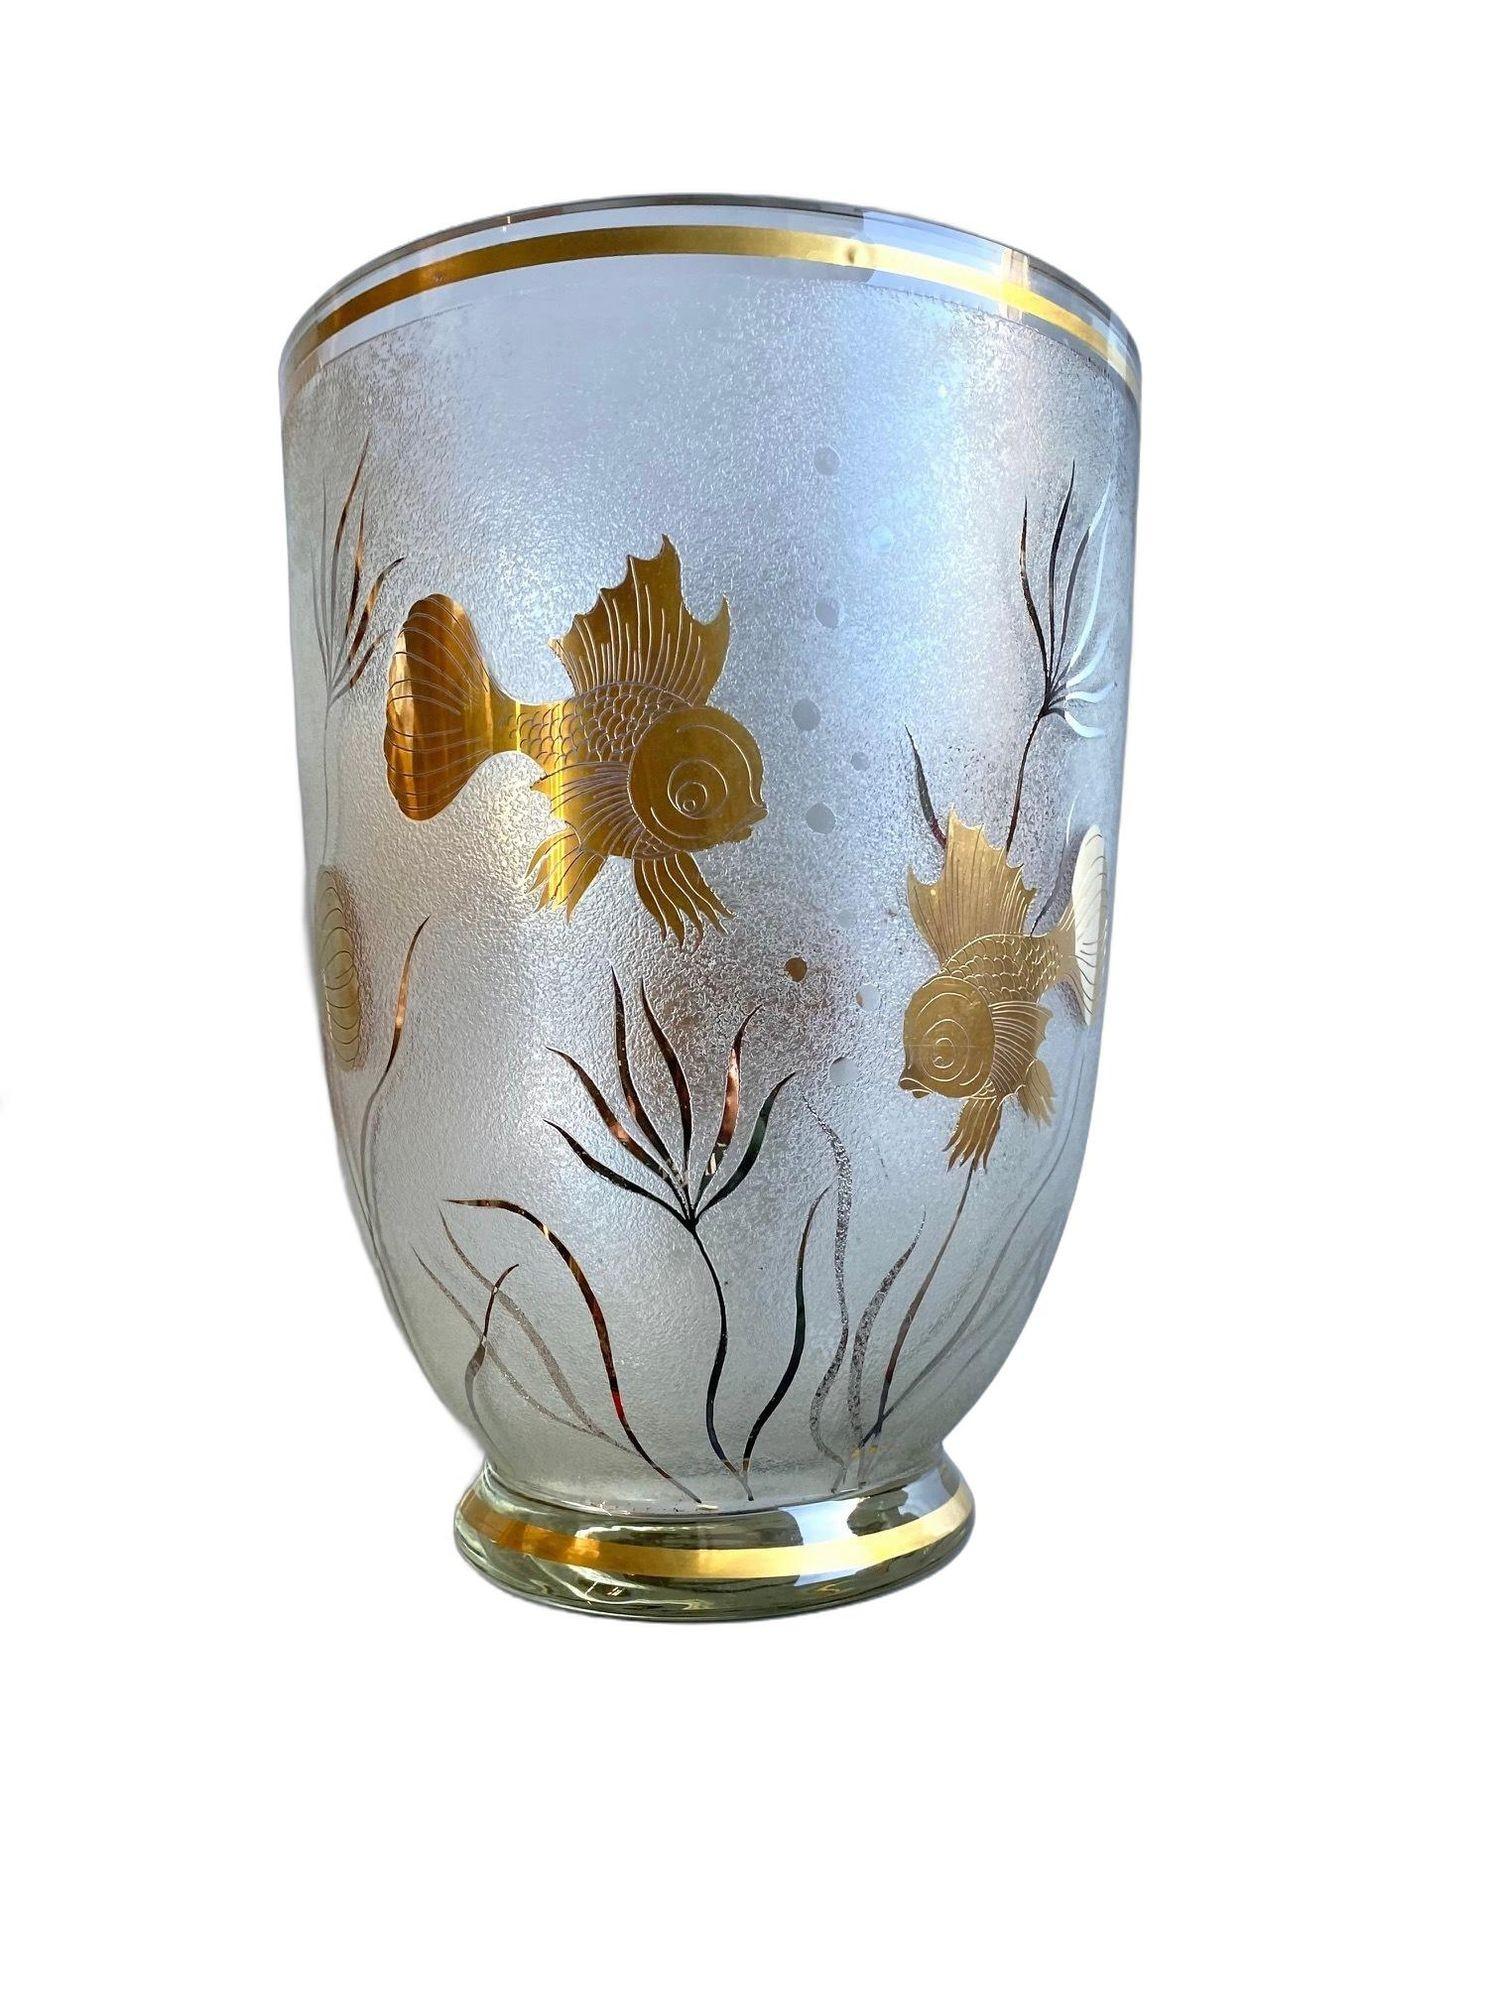 1930s Etched Glass with Gold Overlay Fishes Momumental Vase In Excellent Condition For Sale In Van Nuys, CA